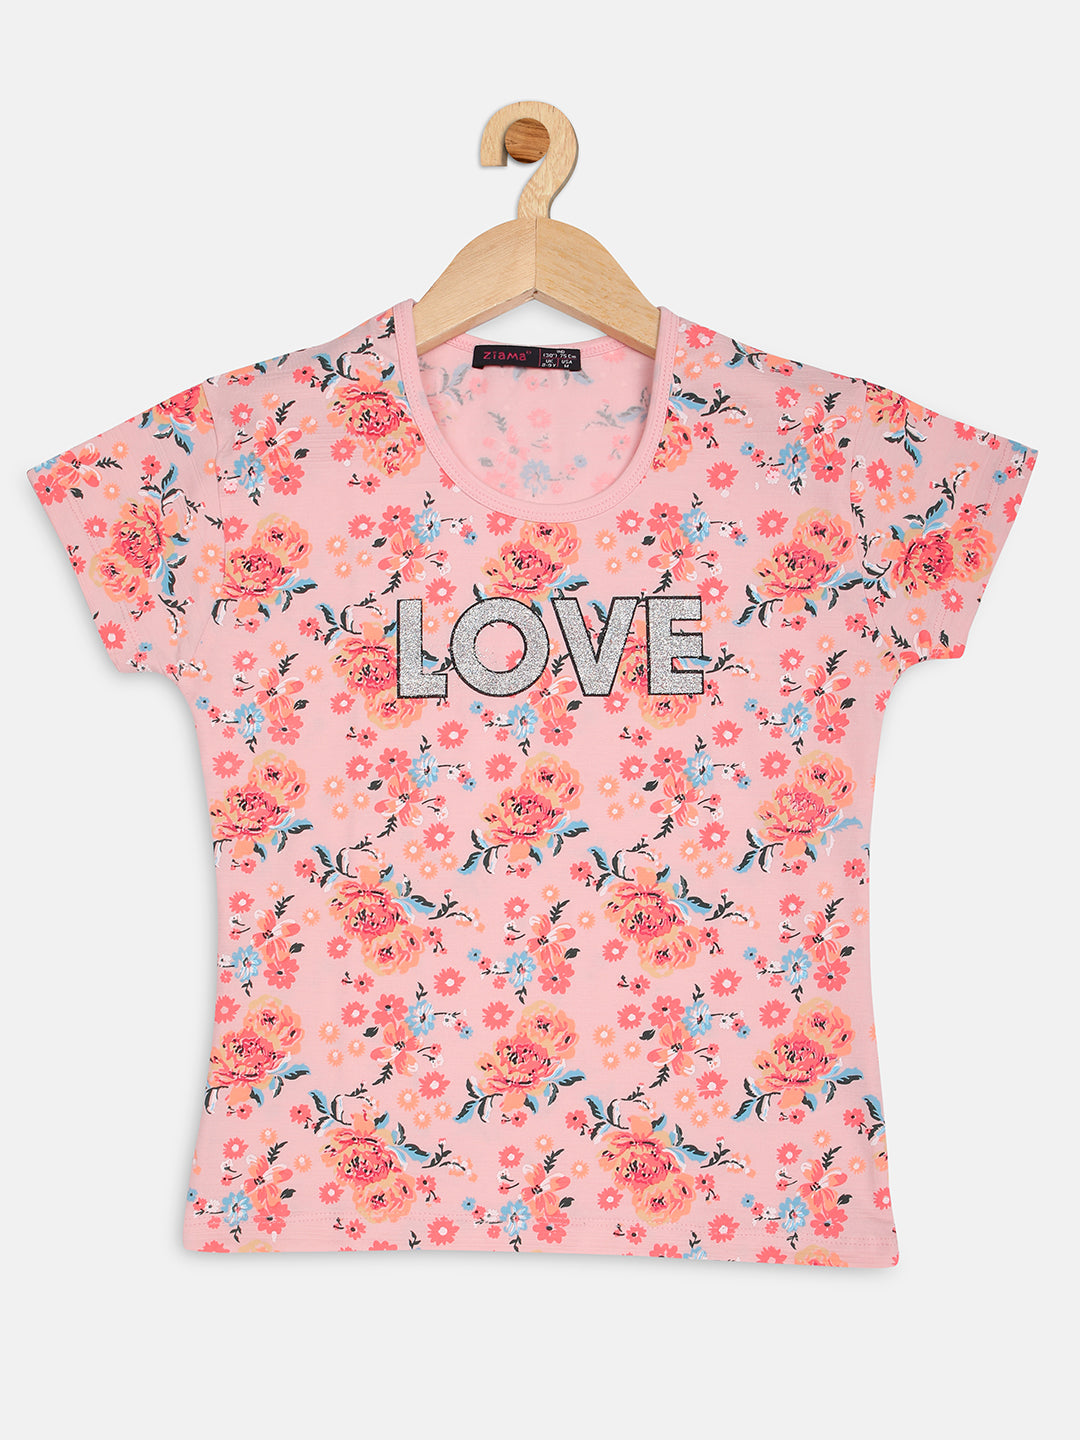 Pampolina  Girls Allover Floral Printed Tops-Pink